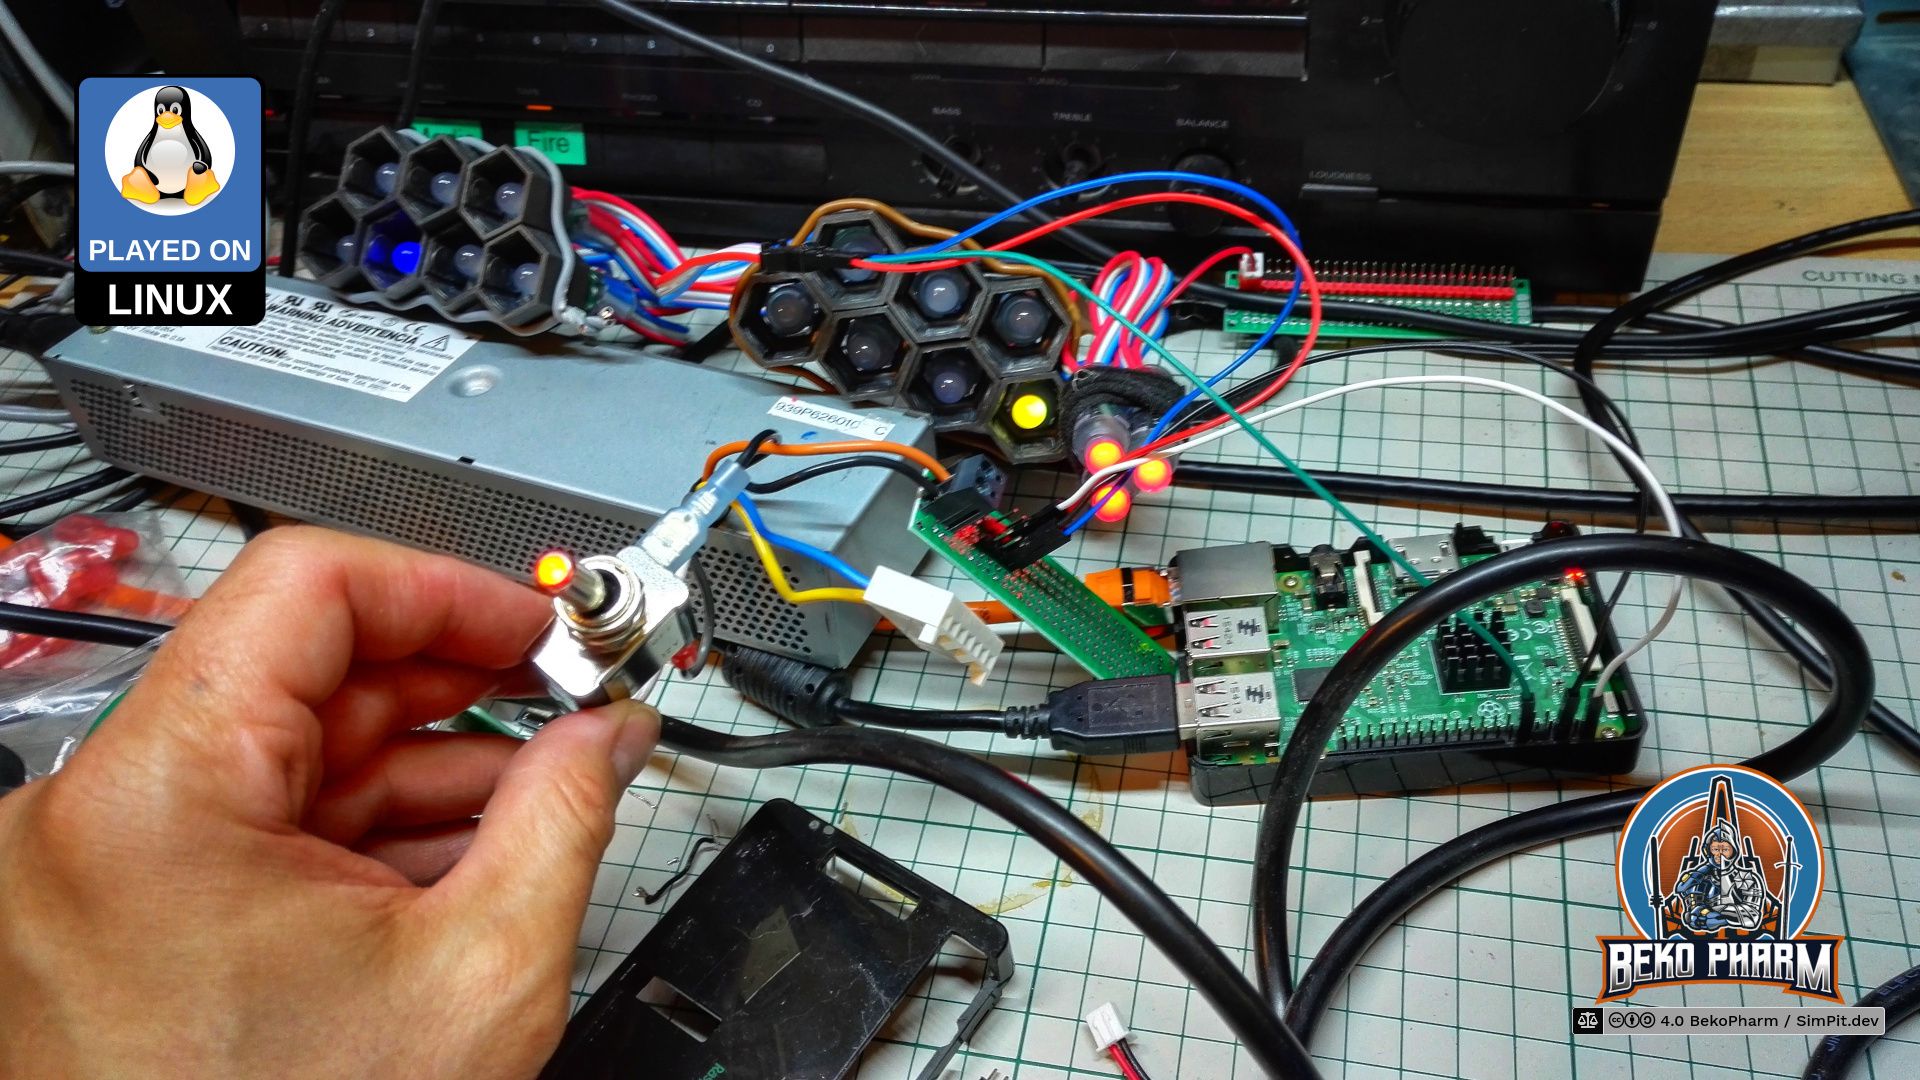 Neopixel string attached to a Raspberry Pi and a dedicated PSU